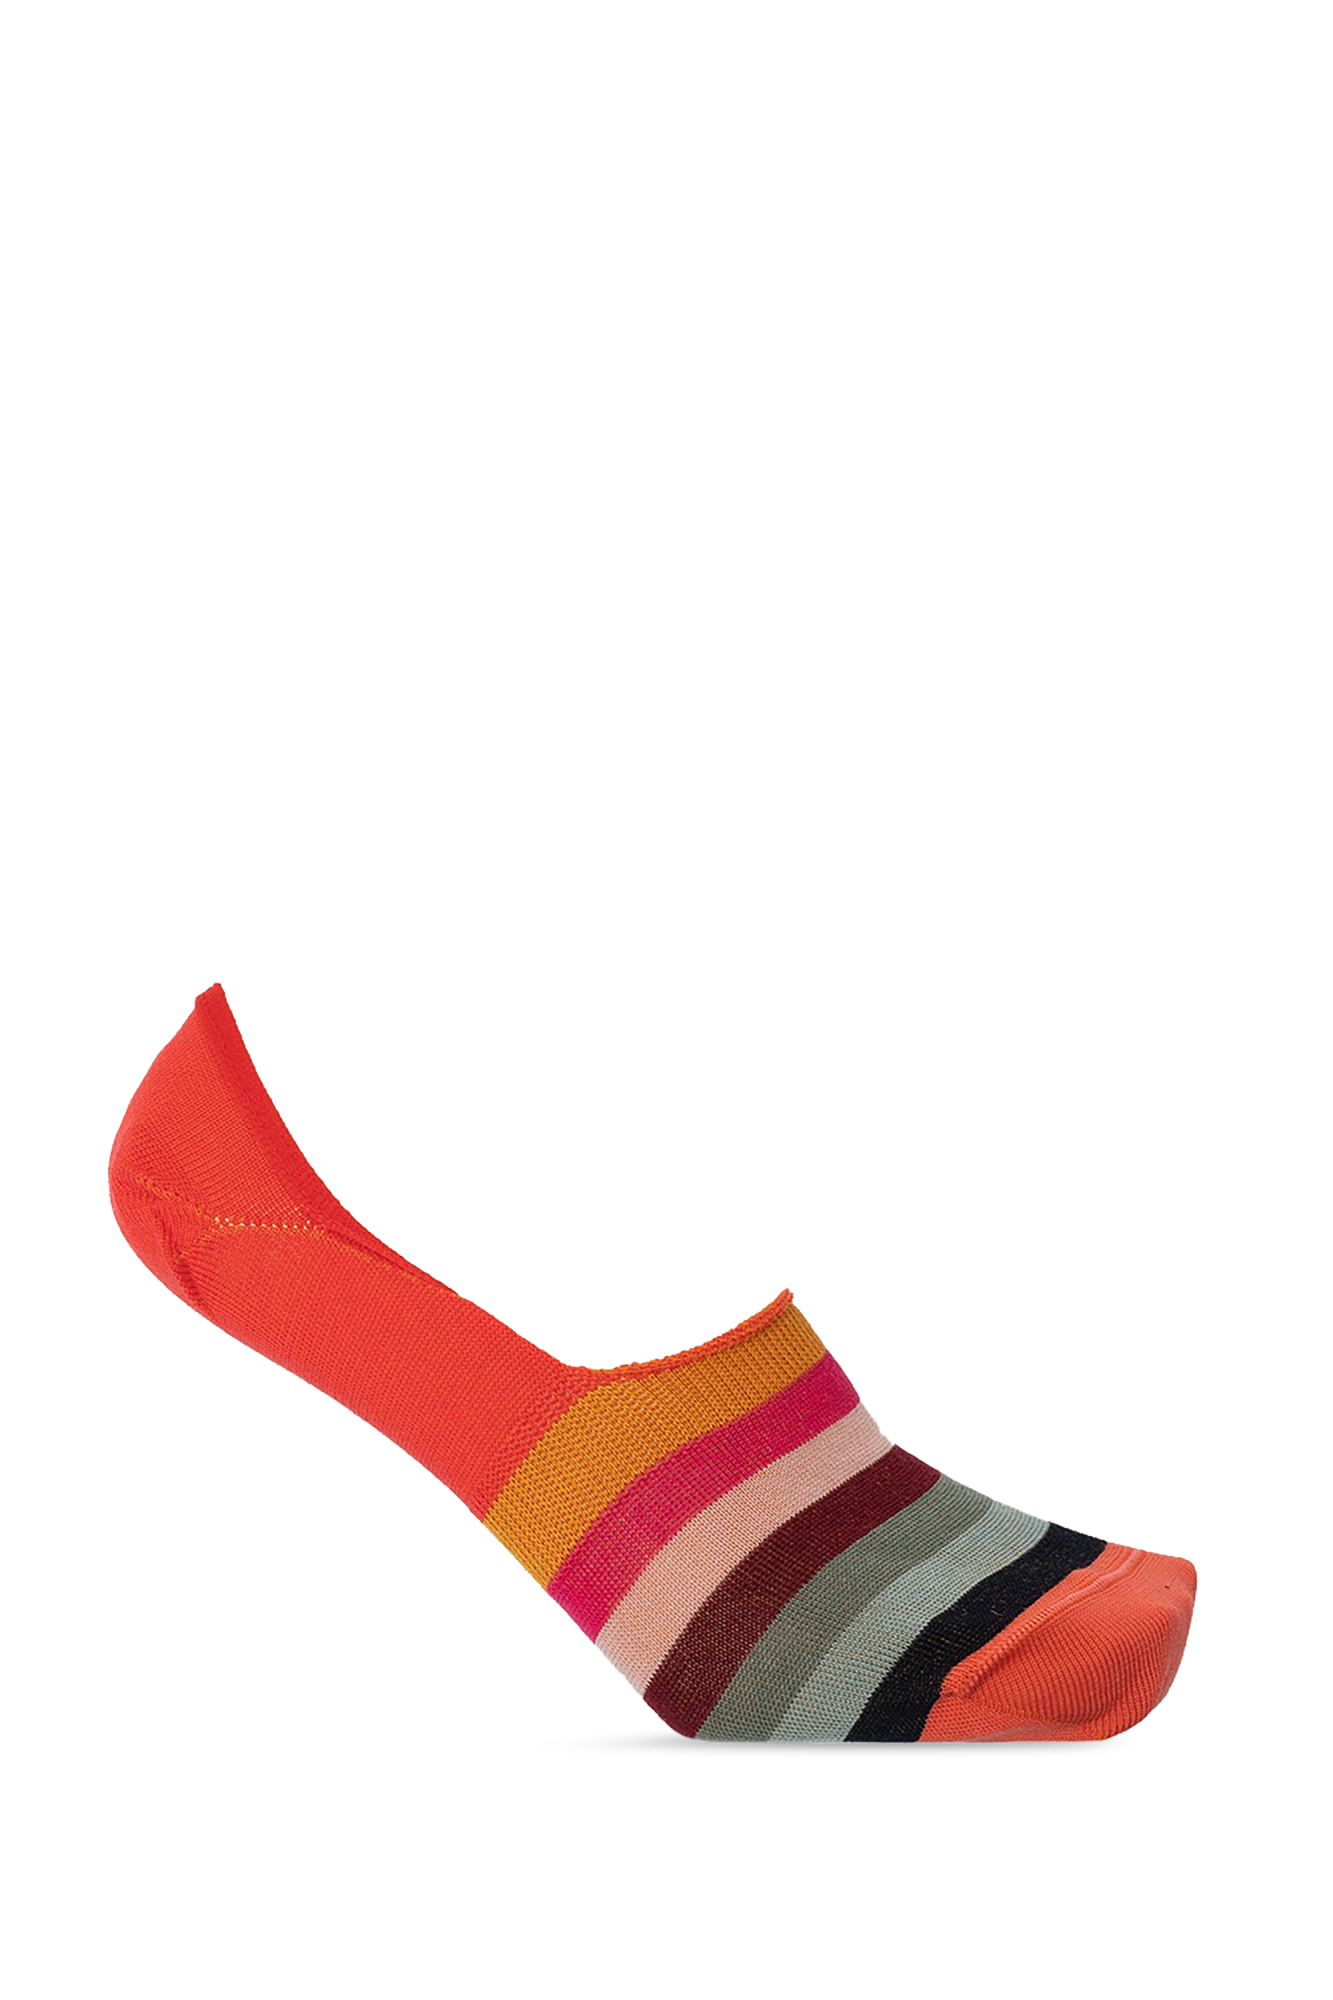 Paul Smith Patterned no-show socks